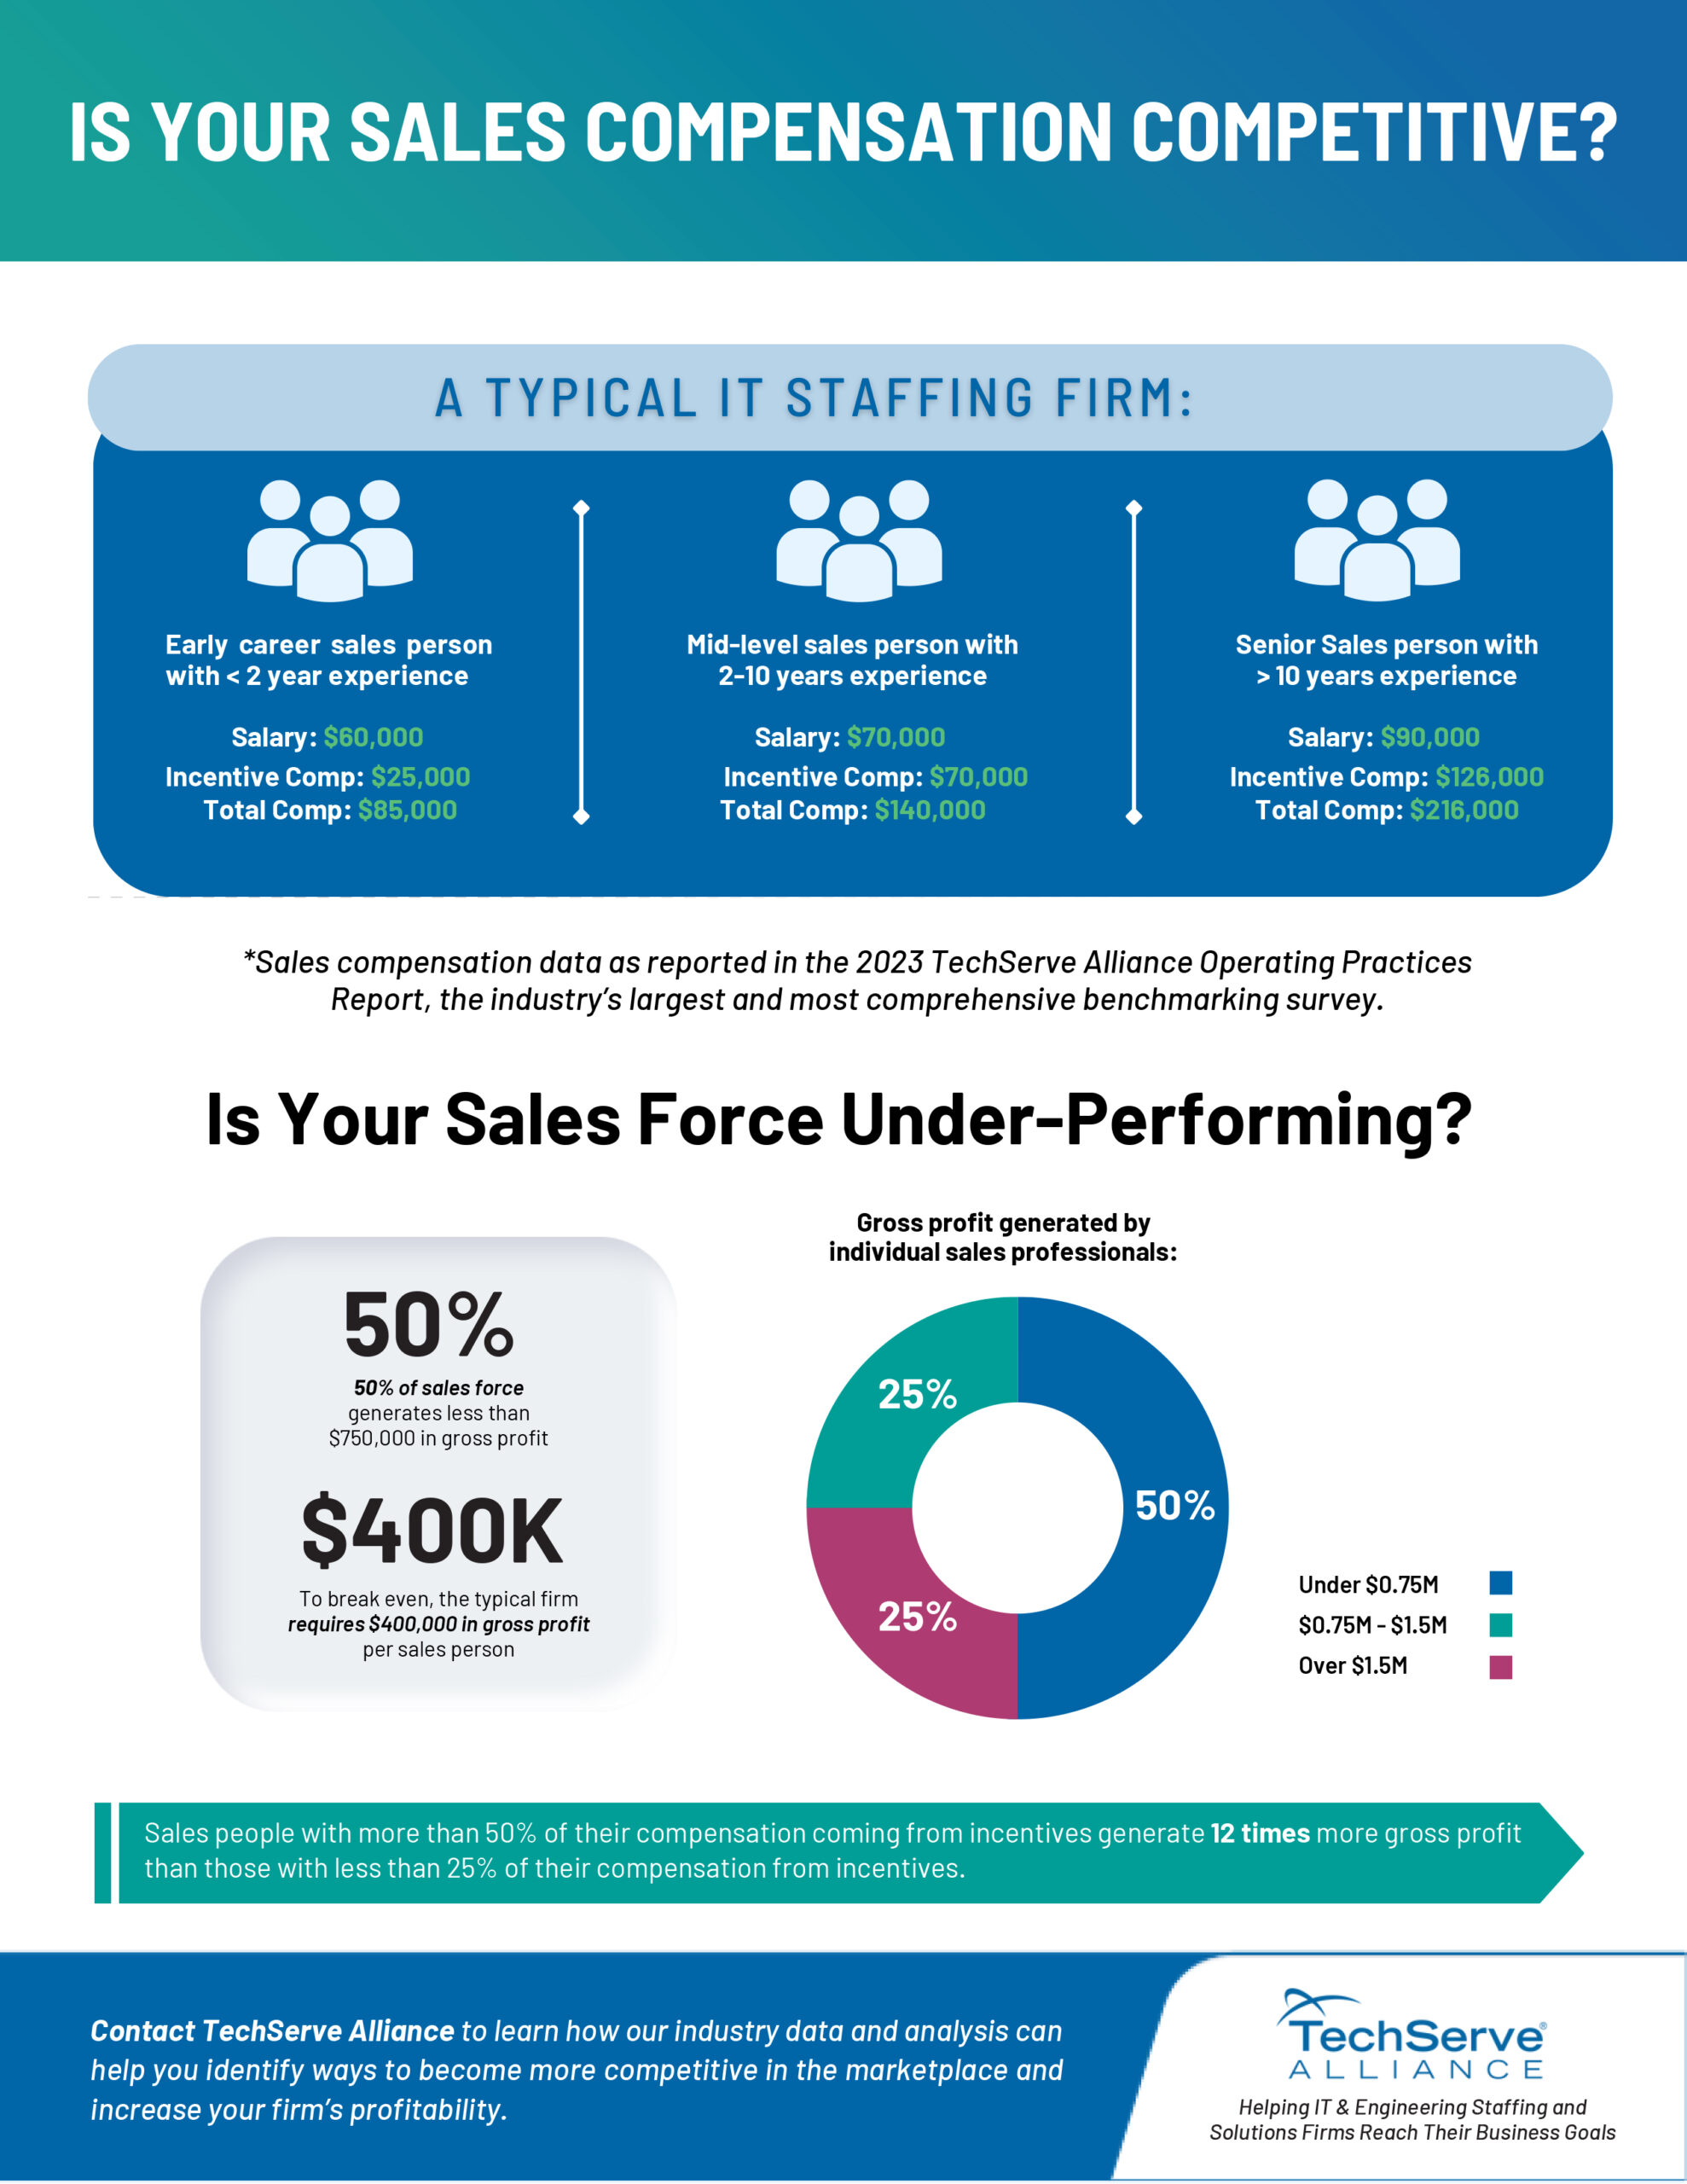 TechServe 2023 Sales Comp for tech staffing firms